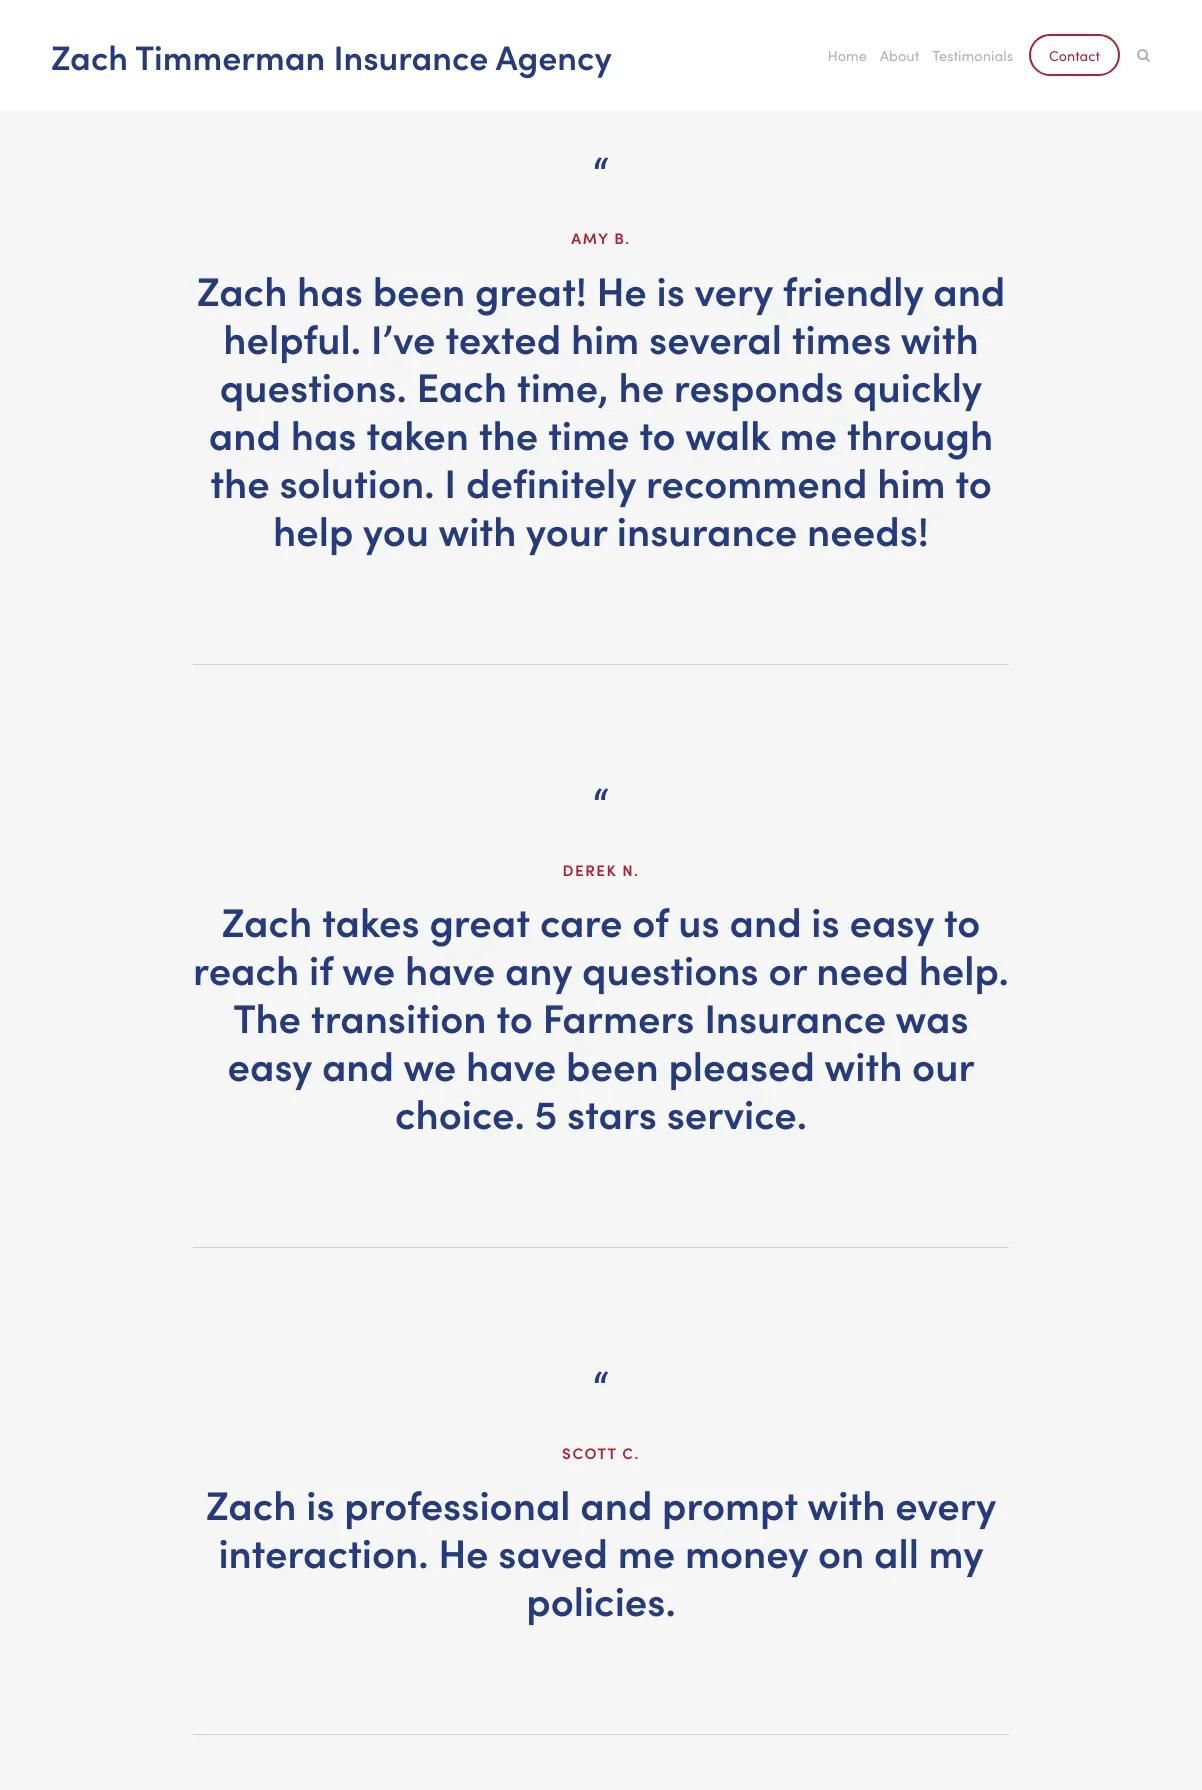 Screenshot 3 of Zach Timmerman Insurance Agency (Example Squarespace Insurance Agent Website)